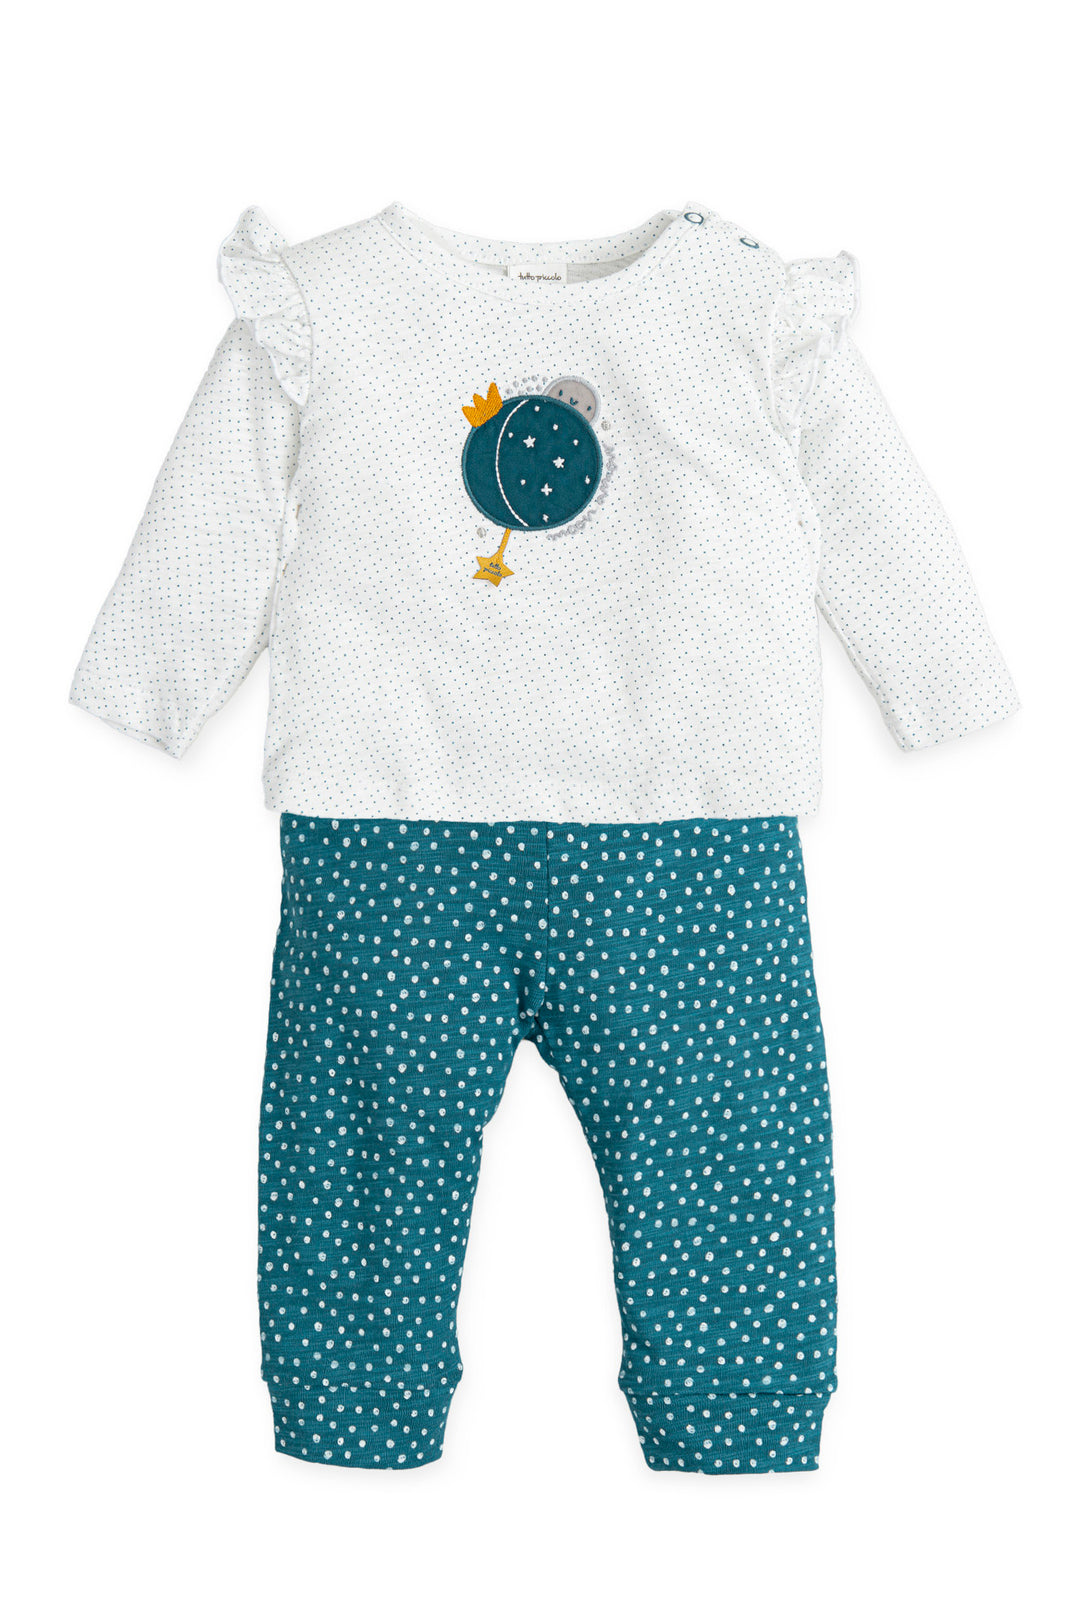 Tutto Piccolo "Calista" Teal Galaxy Print Top & Leggings | Millie and John